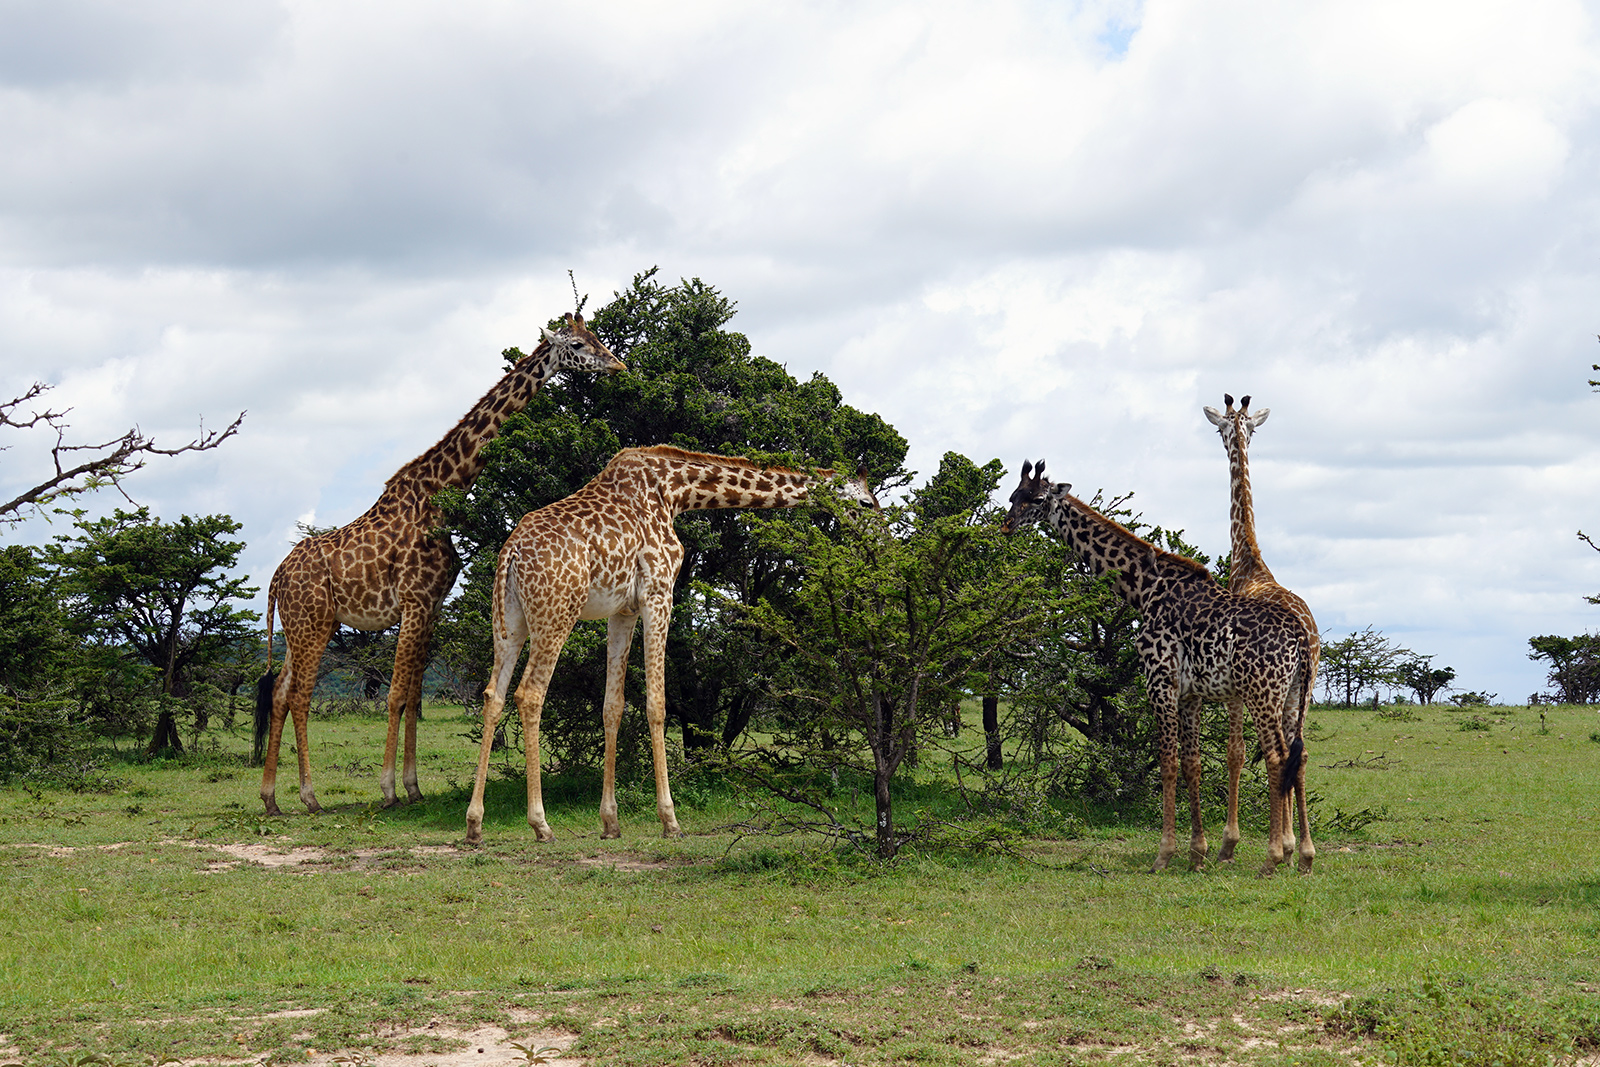 Giraffes are amazing creatures, and we saw many of them